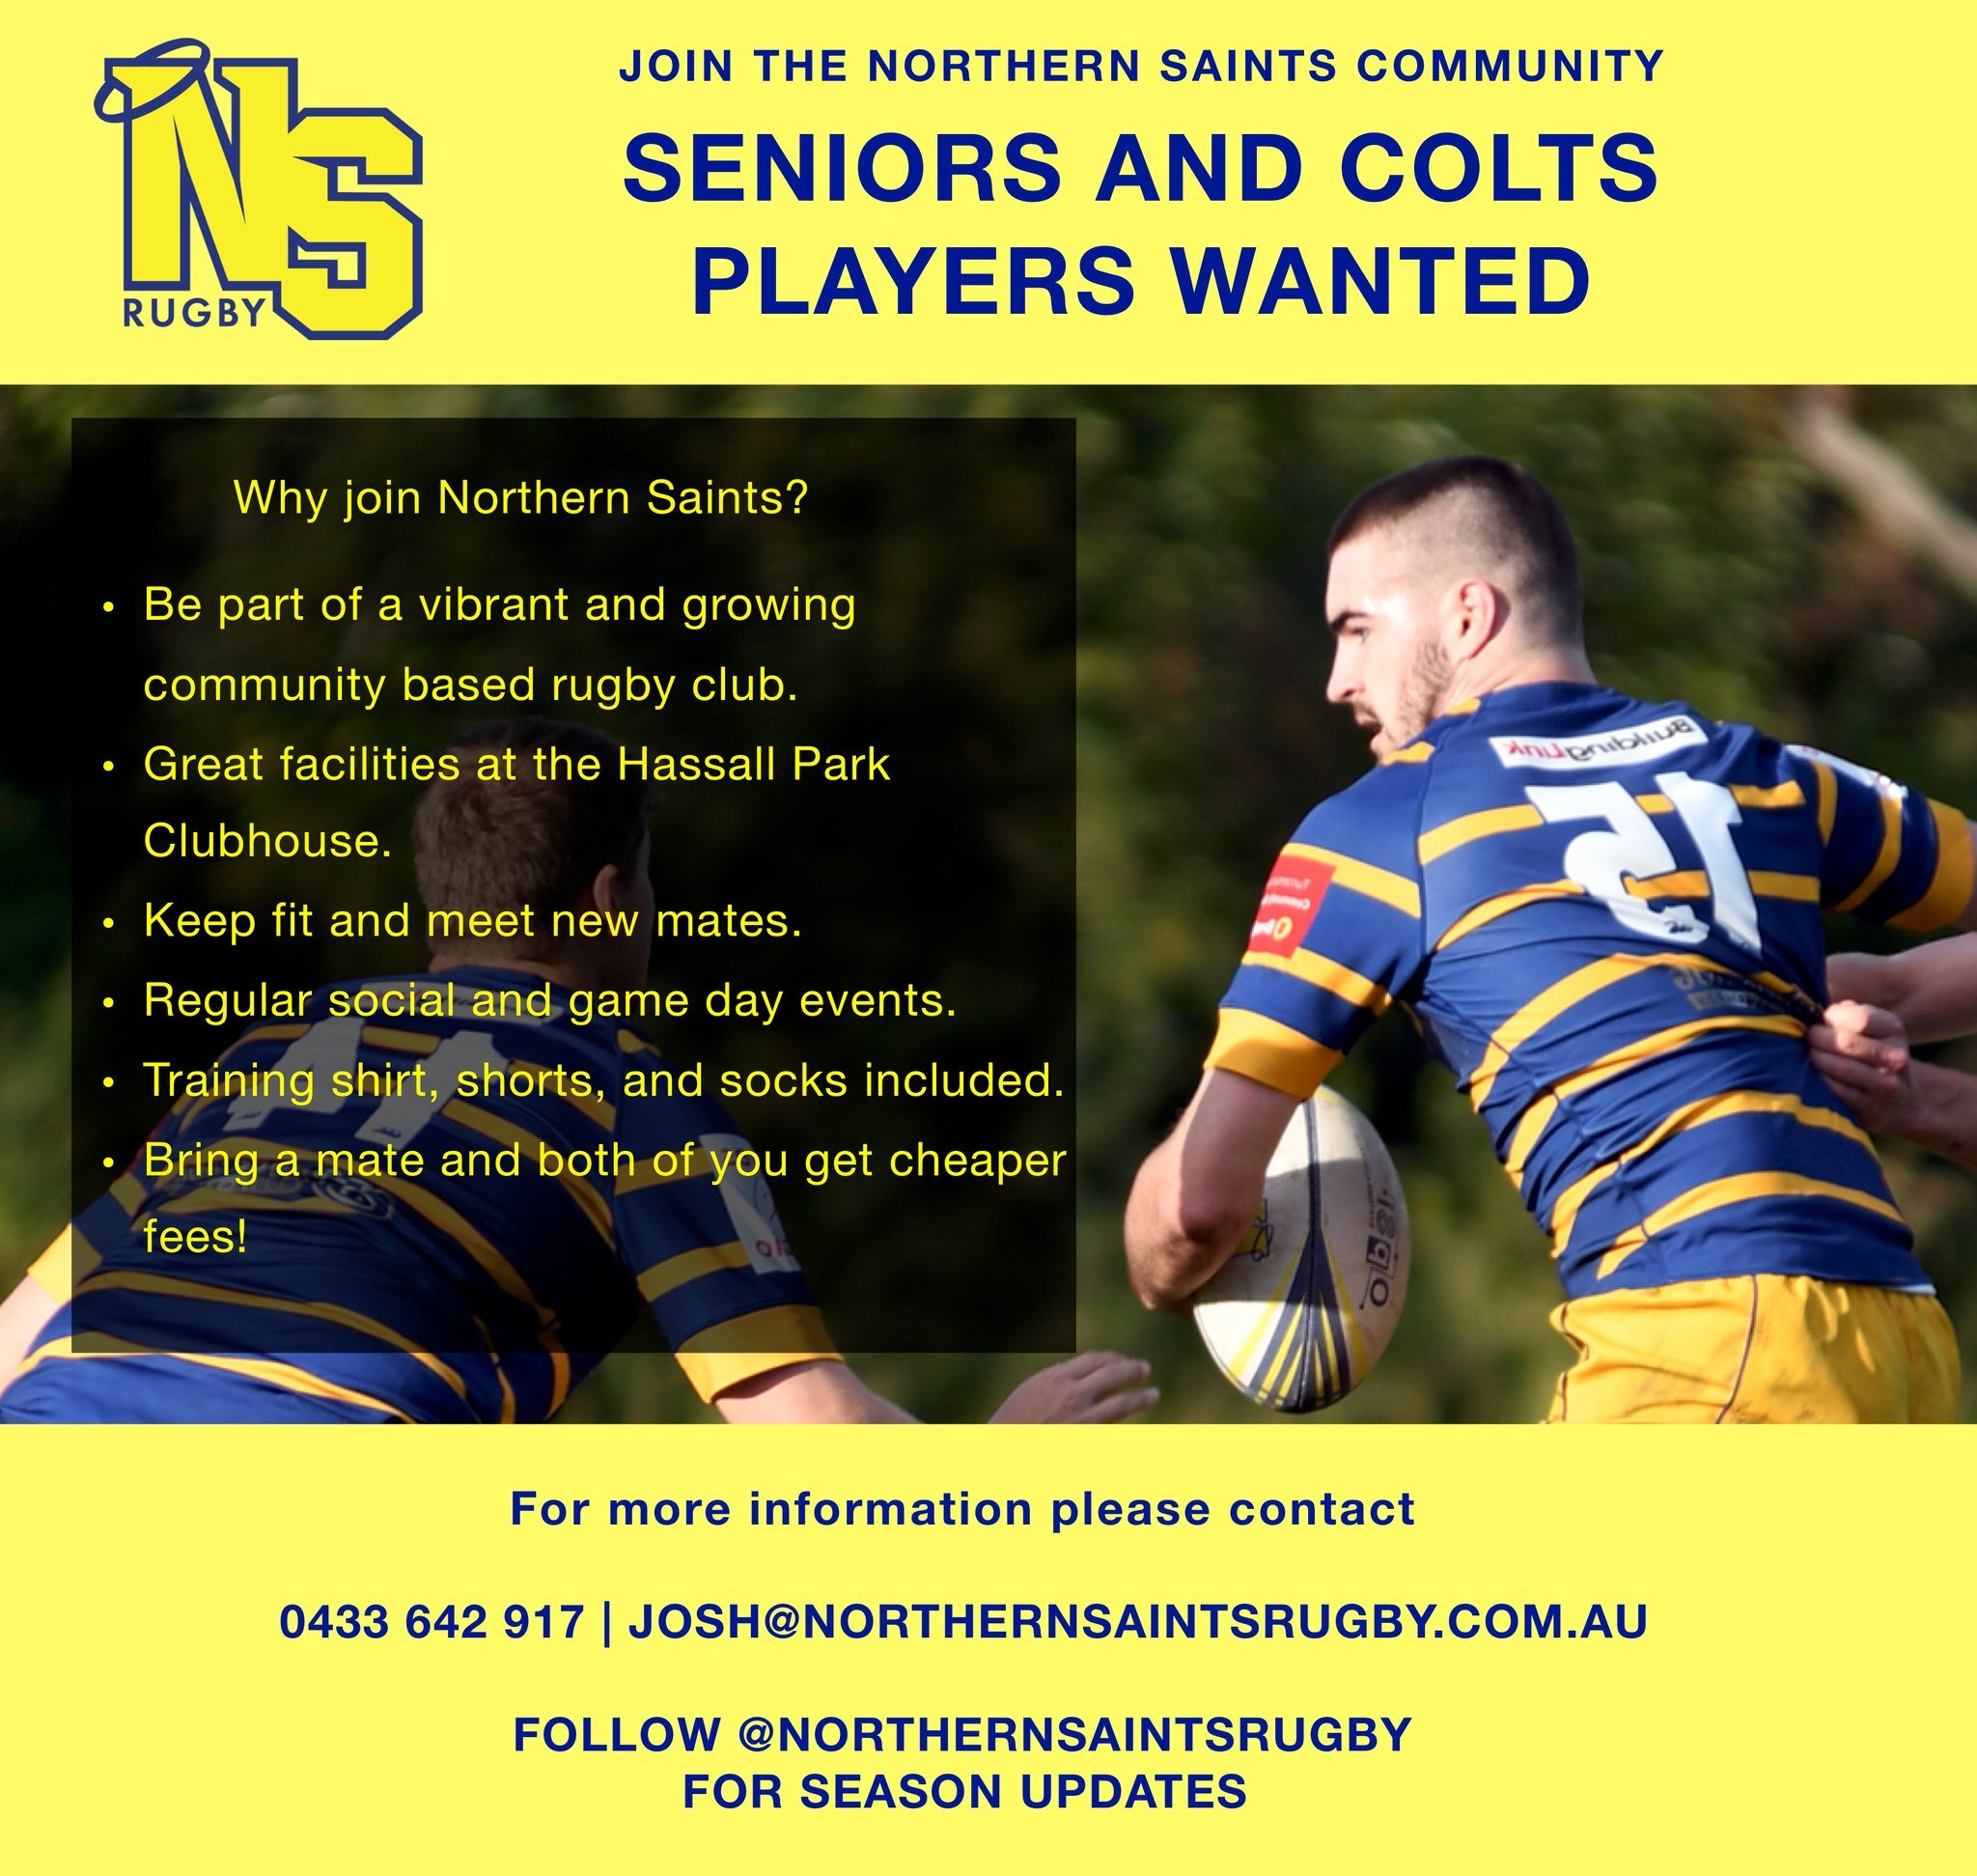 Are you looking to get fit and meet some new mates? Got a group of mates looking for a club to join? Come play at Northern Saints Rugby! Be part of a community like no other.

Reach out to us at josh@northernsaintsrugby.com.au for information on how 